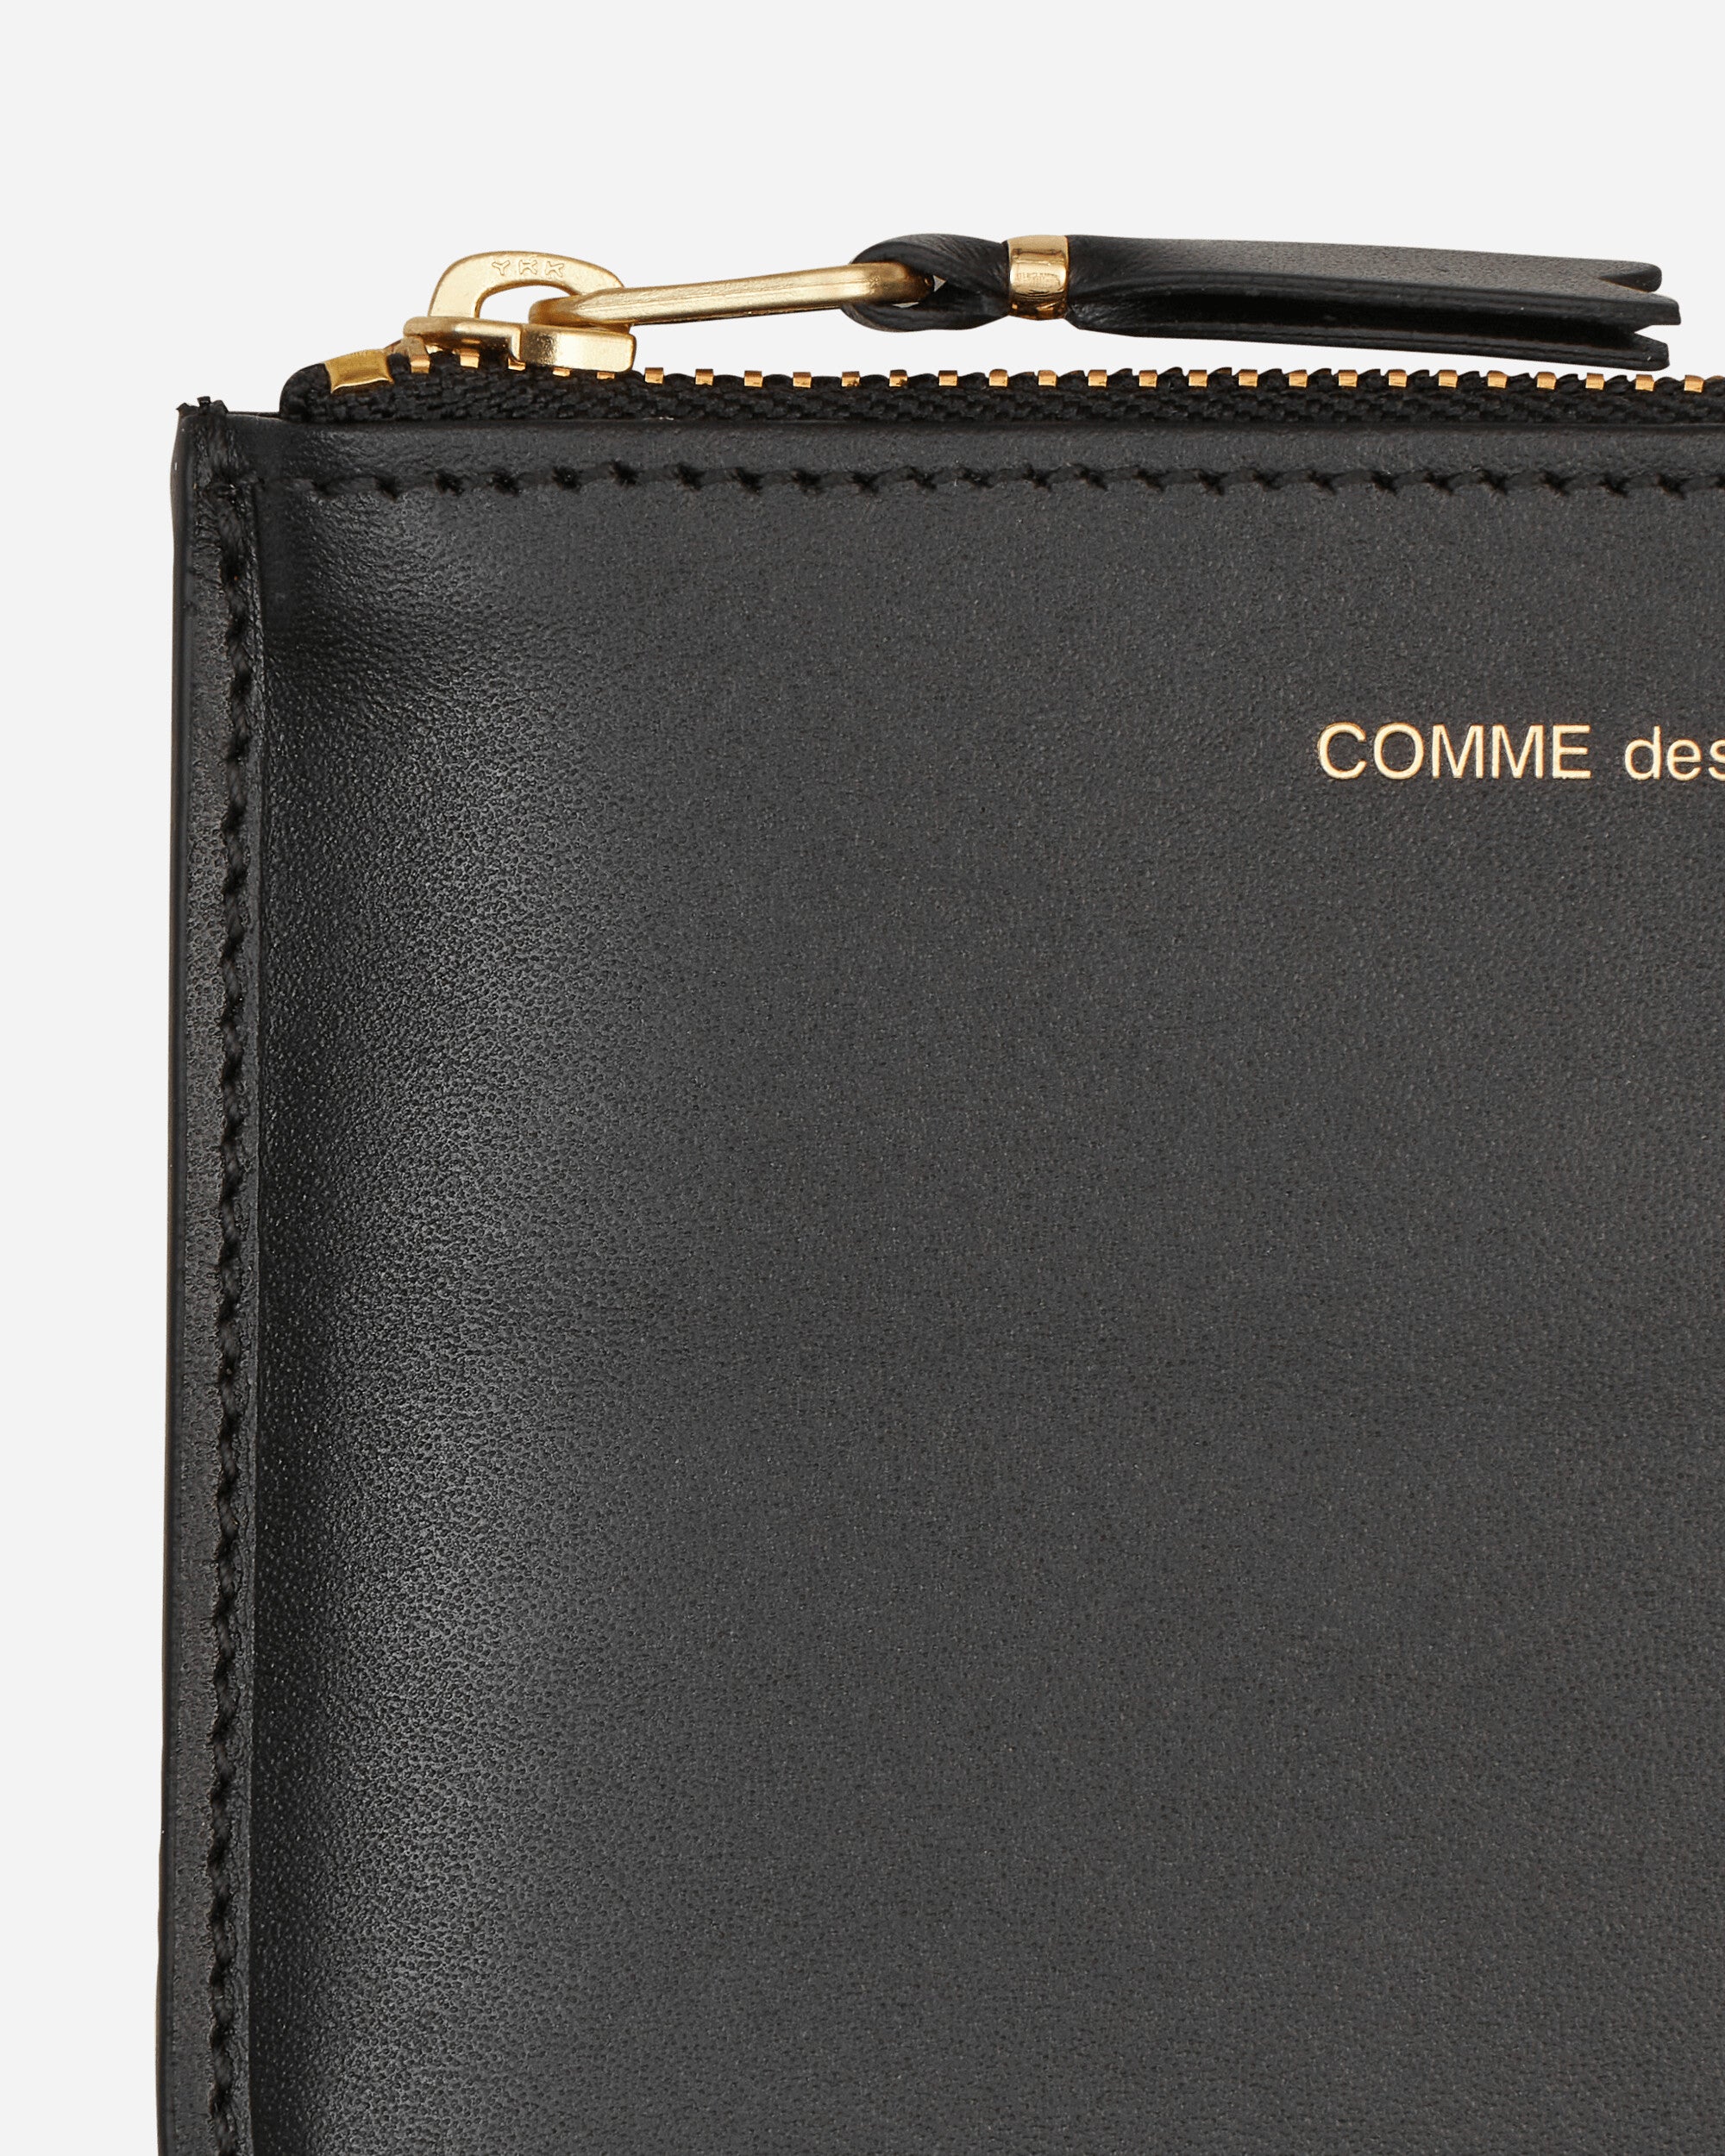 Comme Des Garçons Wallet Wallet/Classic Print Check Print Wallets and Cardholders Wallets SA8100CP 1